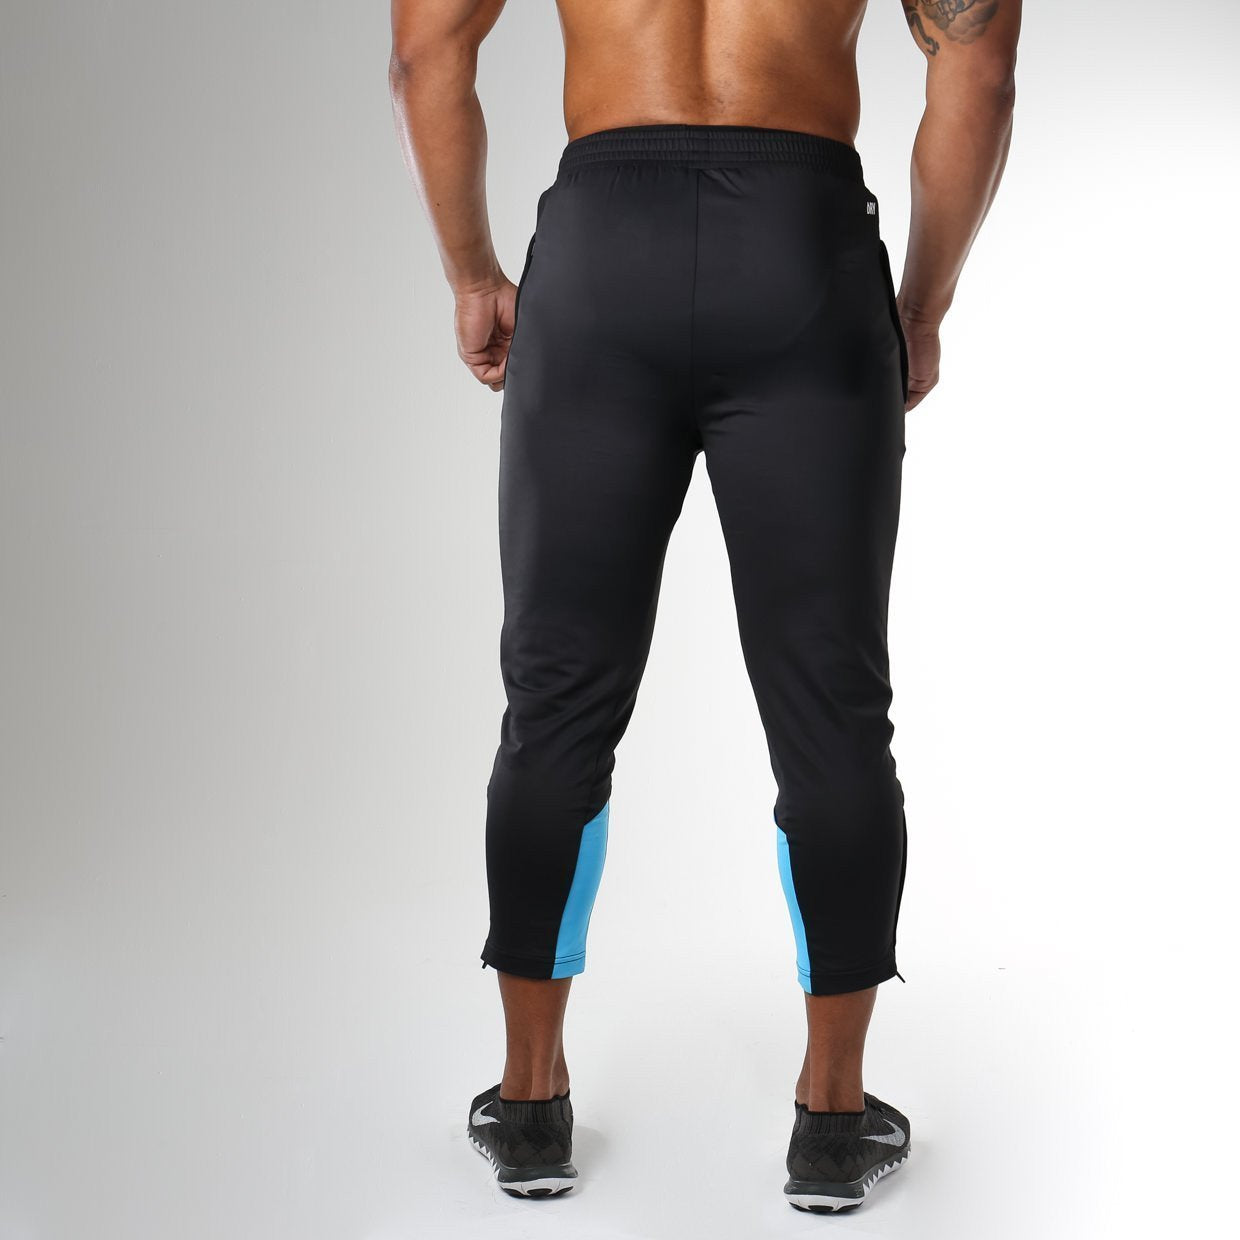 Reactive 3/4 Training Pant in Black/Blue - view 4